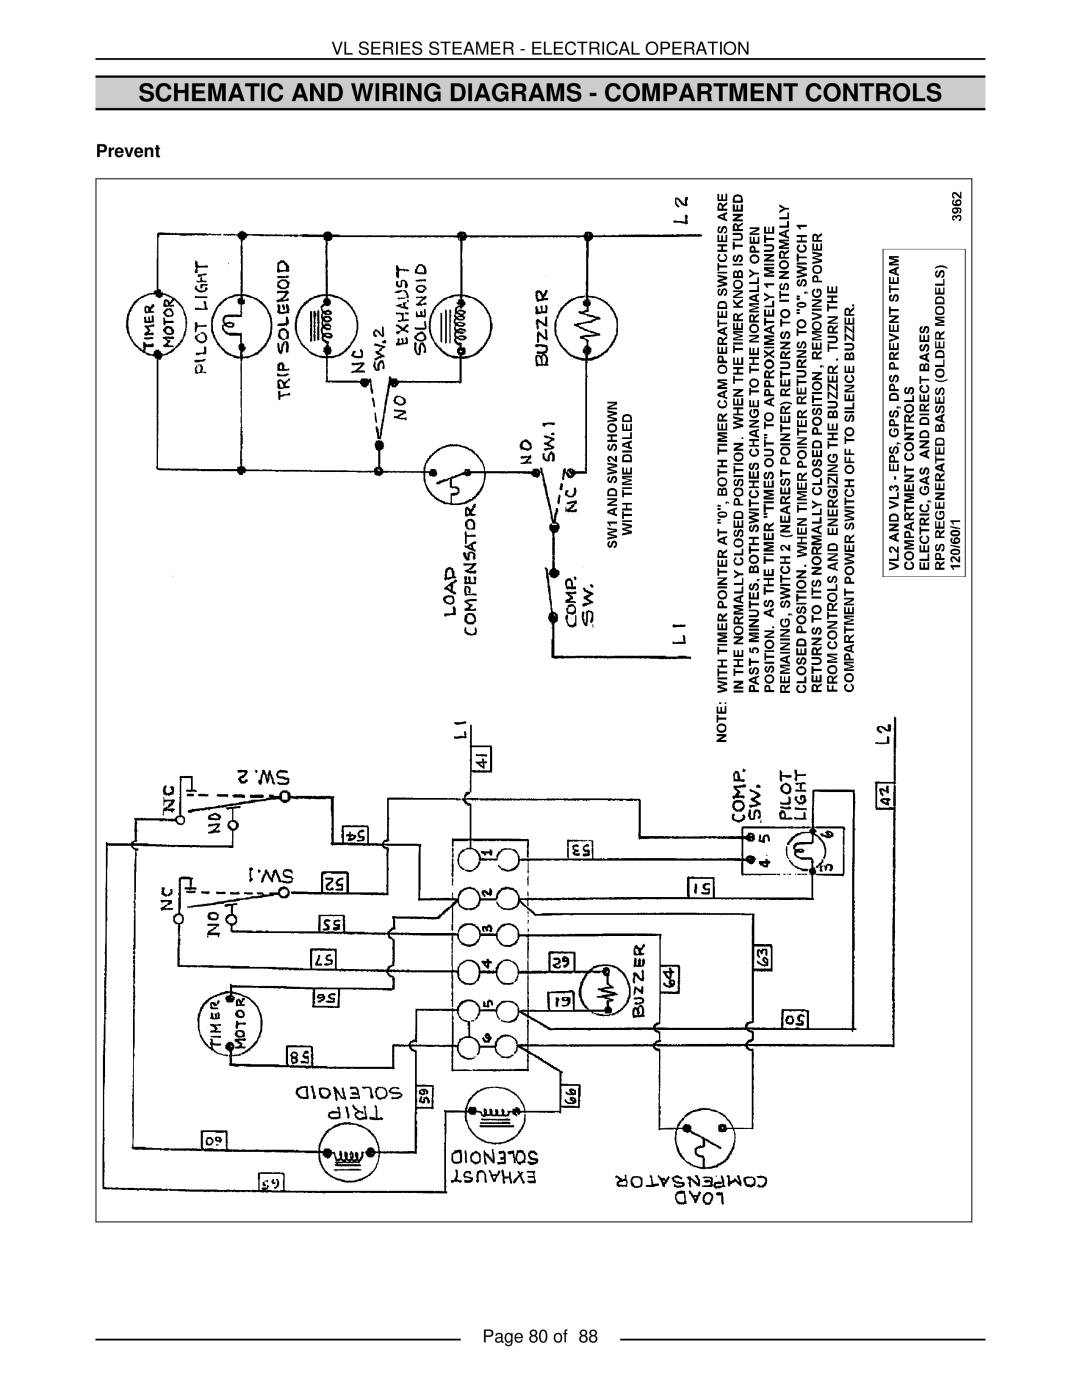 Vulcan-Hart VL3GMS, VL2GMS, VL3GAS, VL2GAS, VL2GSS, VL3GSS Vl Series Steamer - Electrical Operation, Prevent, Page 80 of 